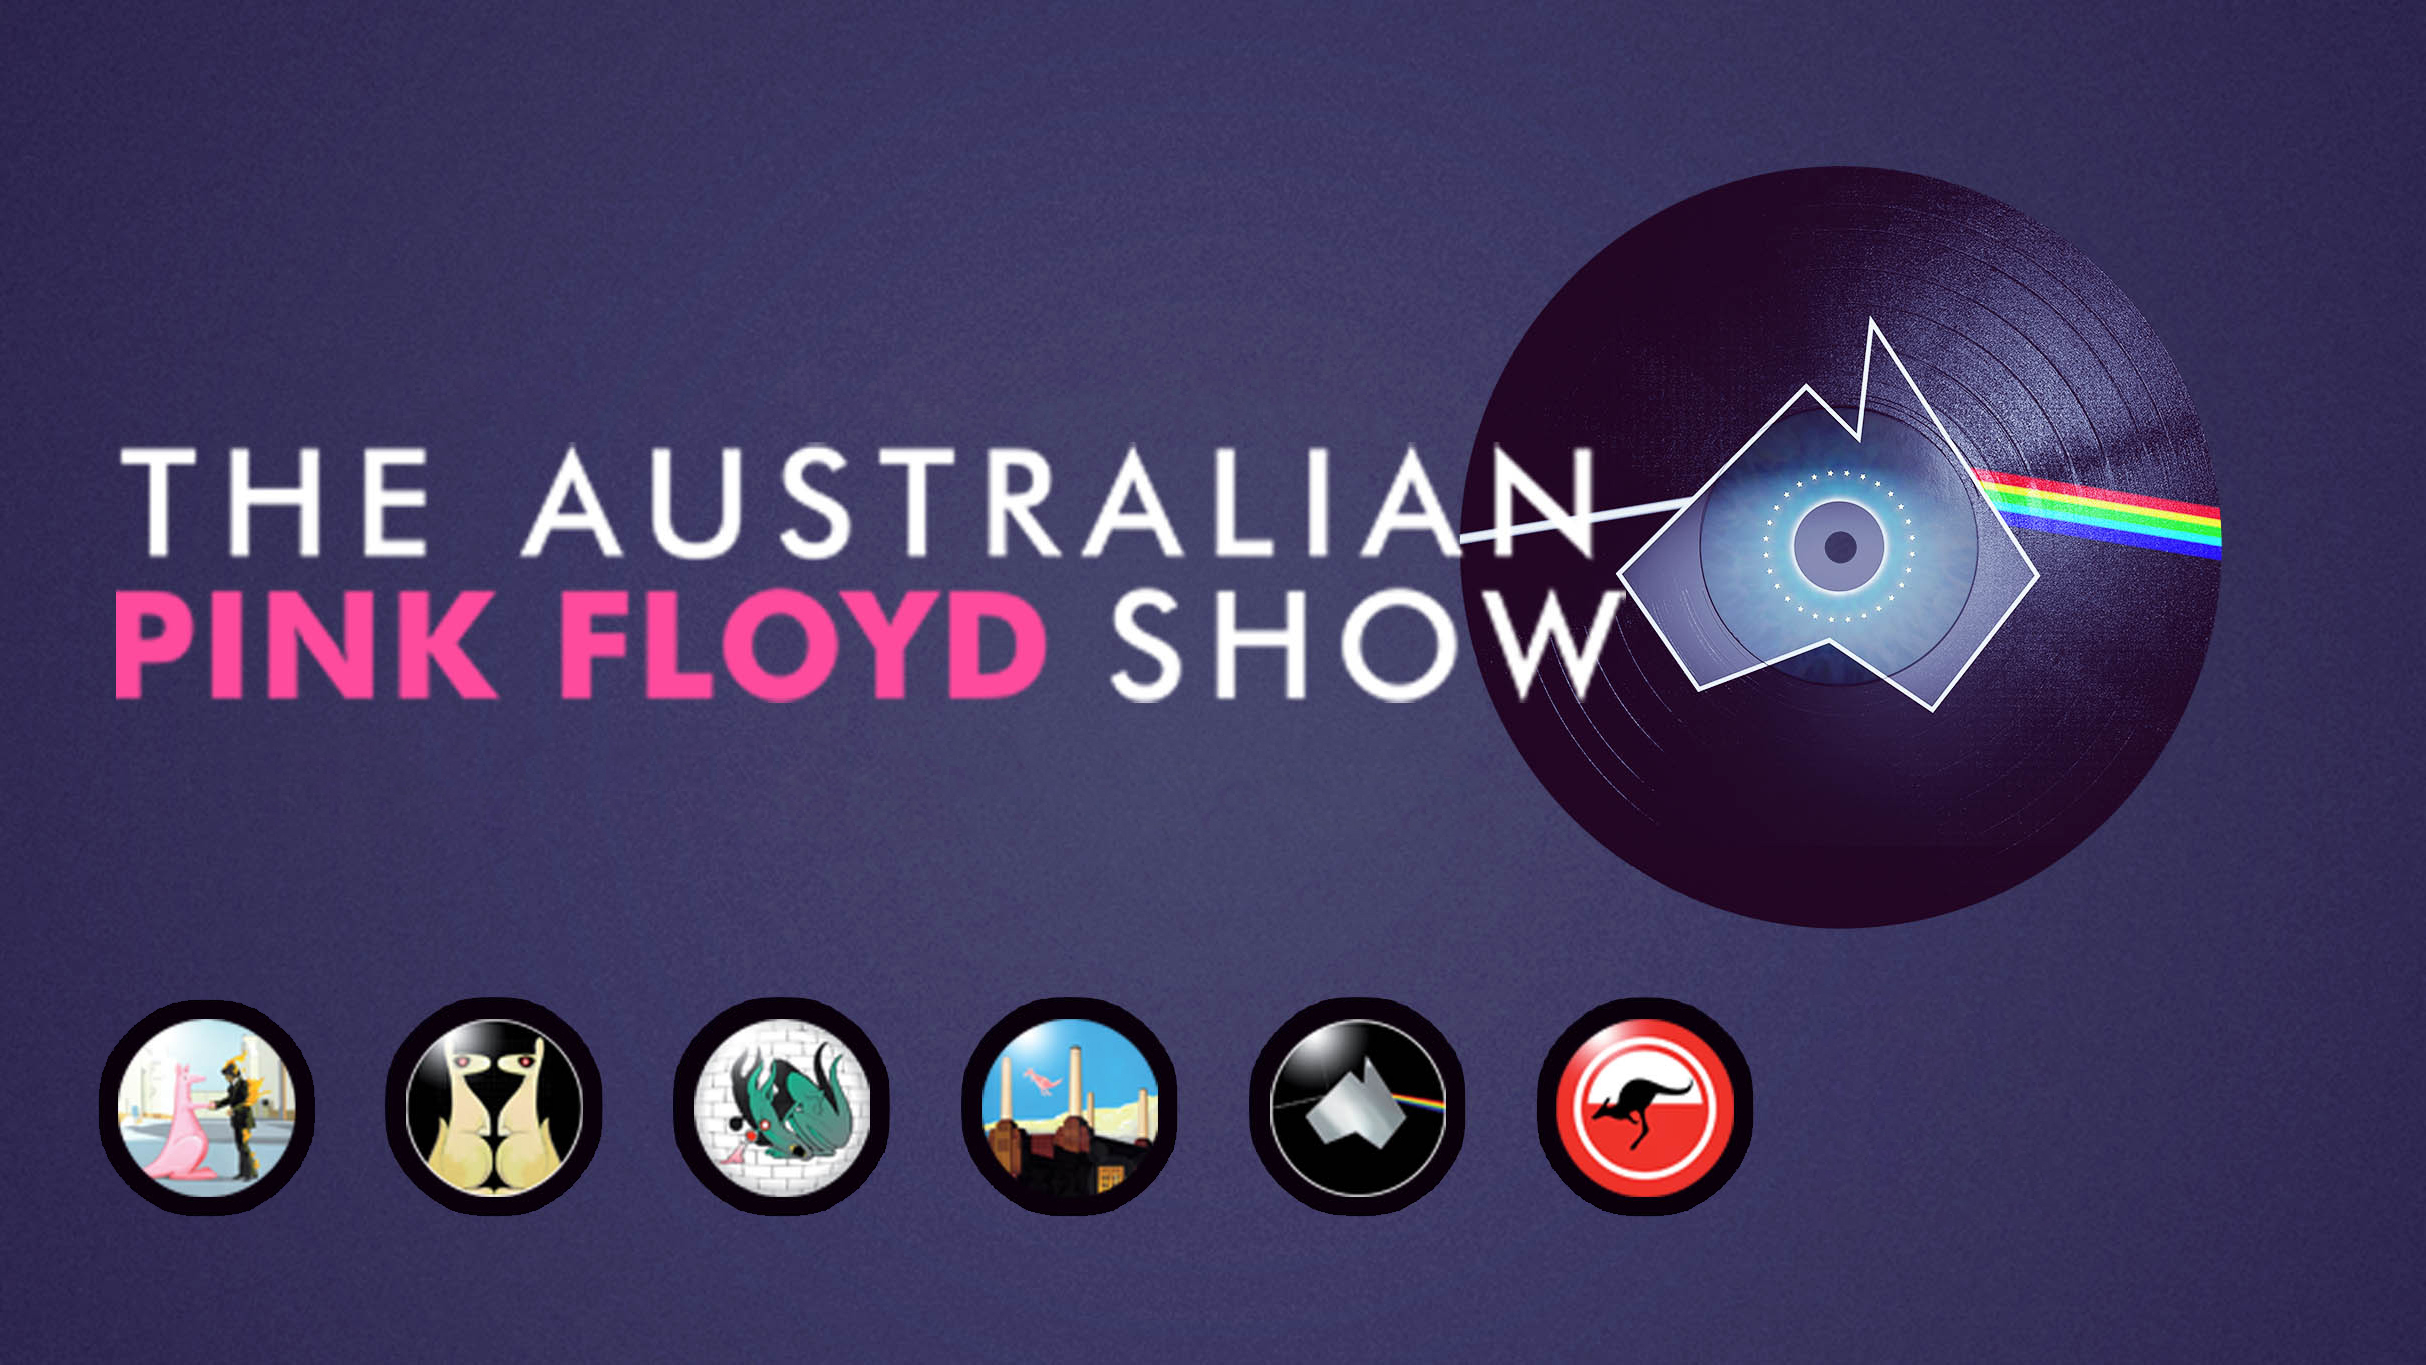 The Australian Pink Floyd Show-The 1st Class Travelling Set Tour